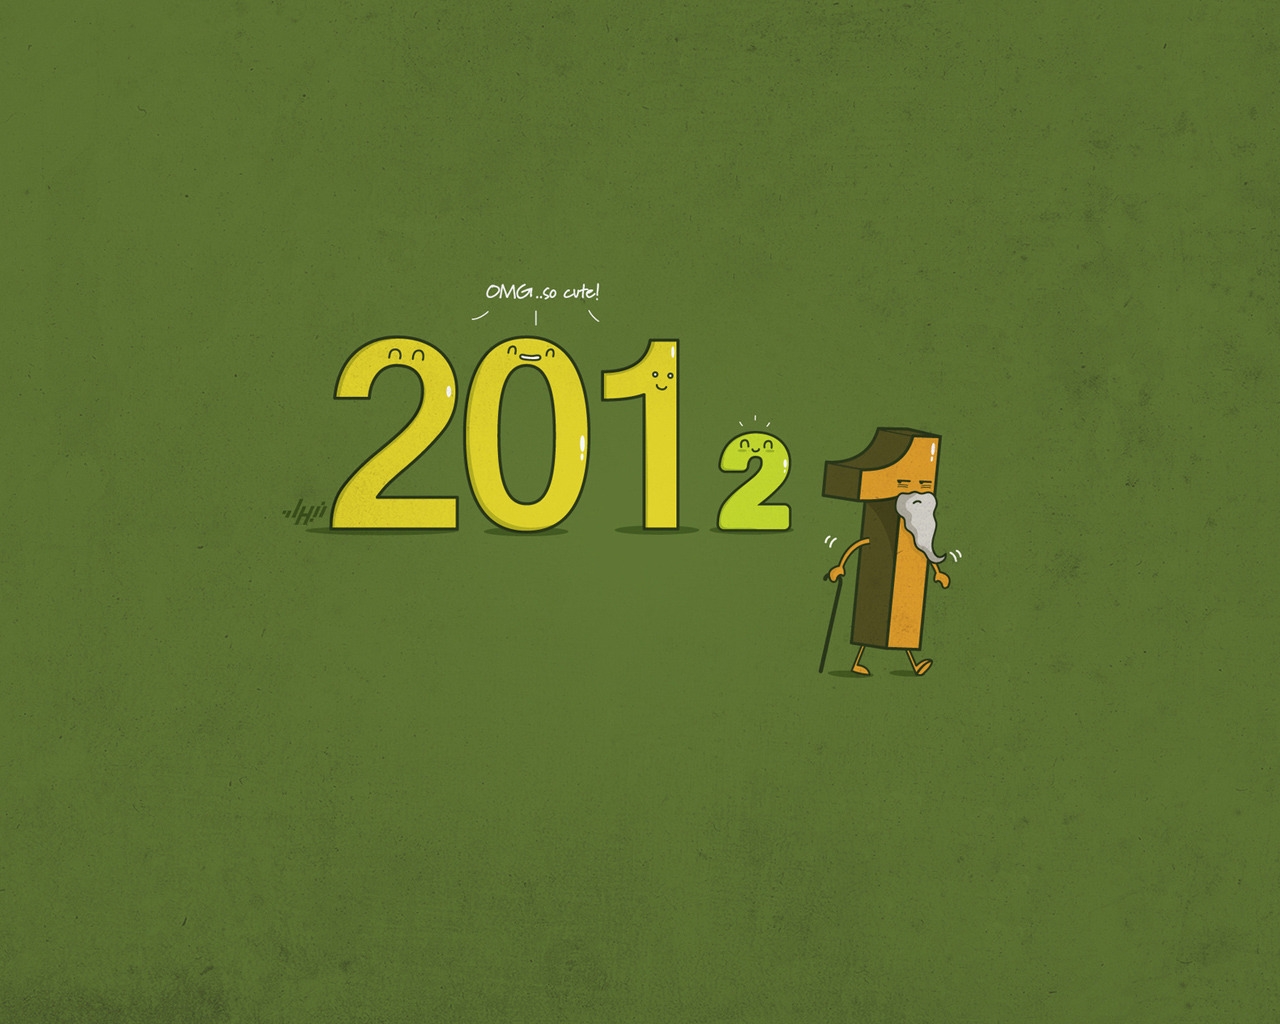 2012 Its Coming for 1280 x 1024 resolution